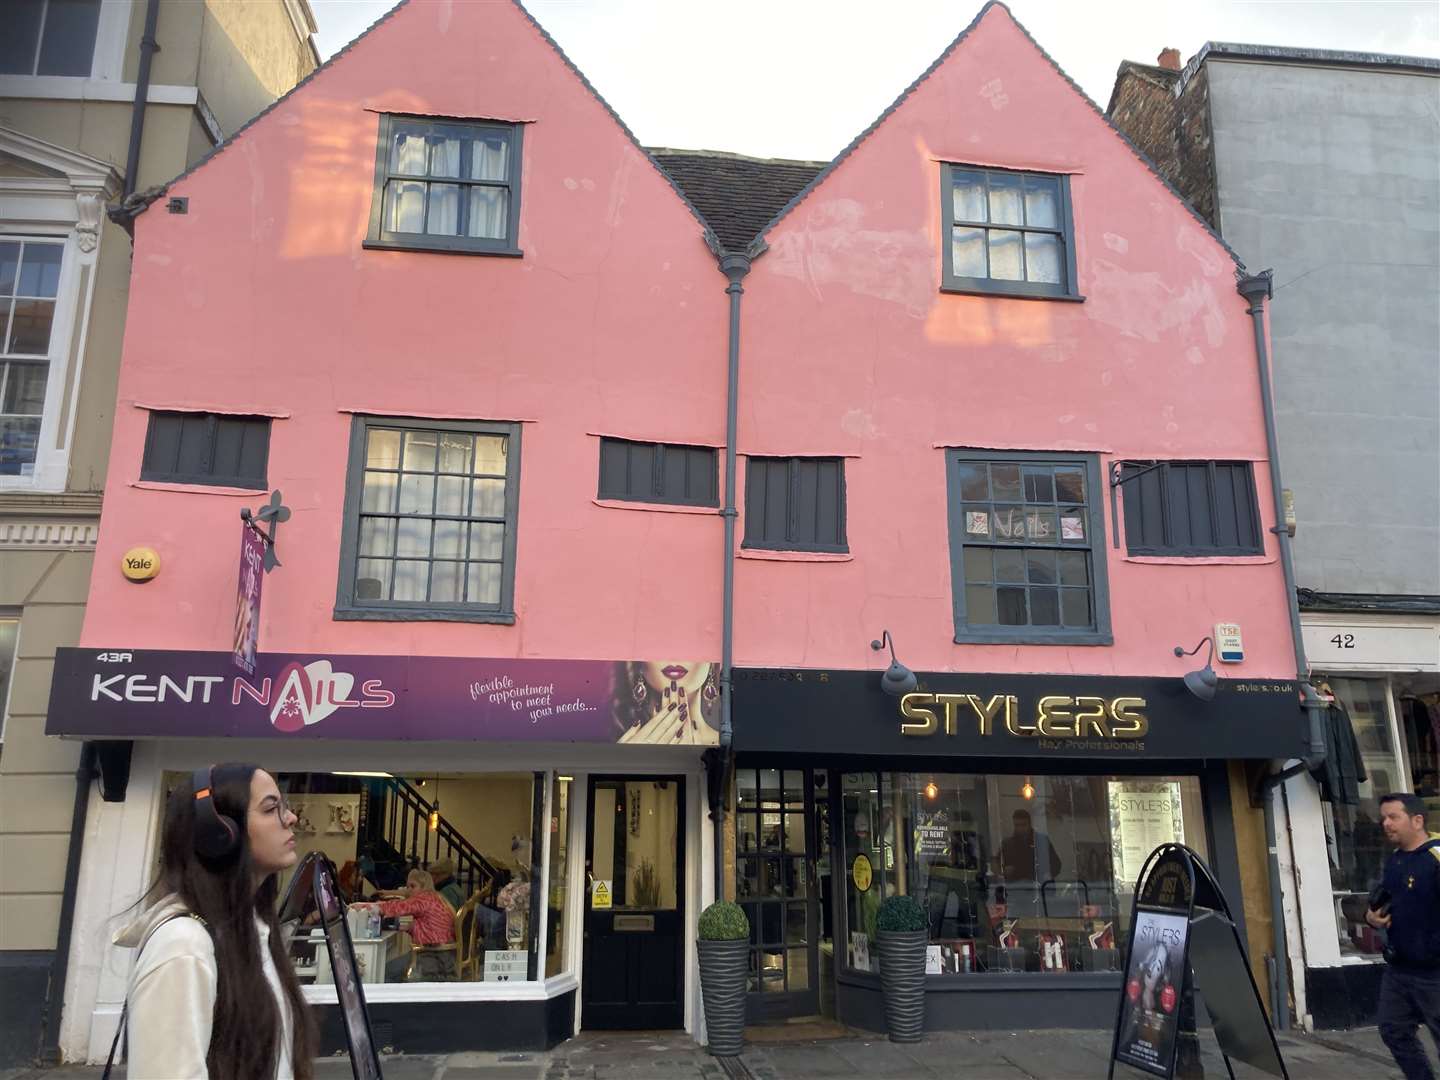 These buildings in St Peter's Street have been painted pink